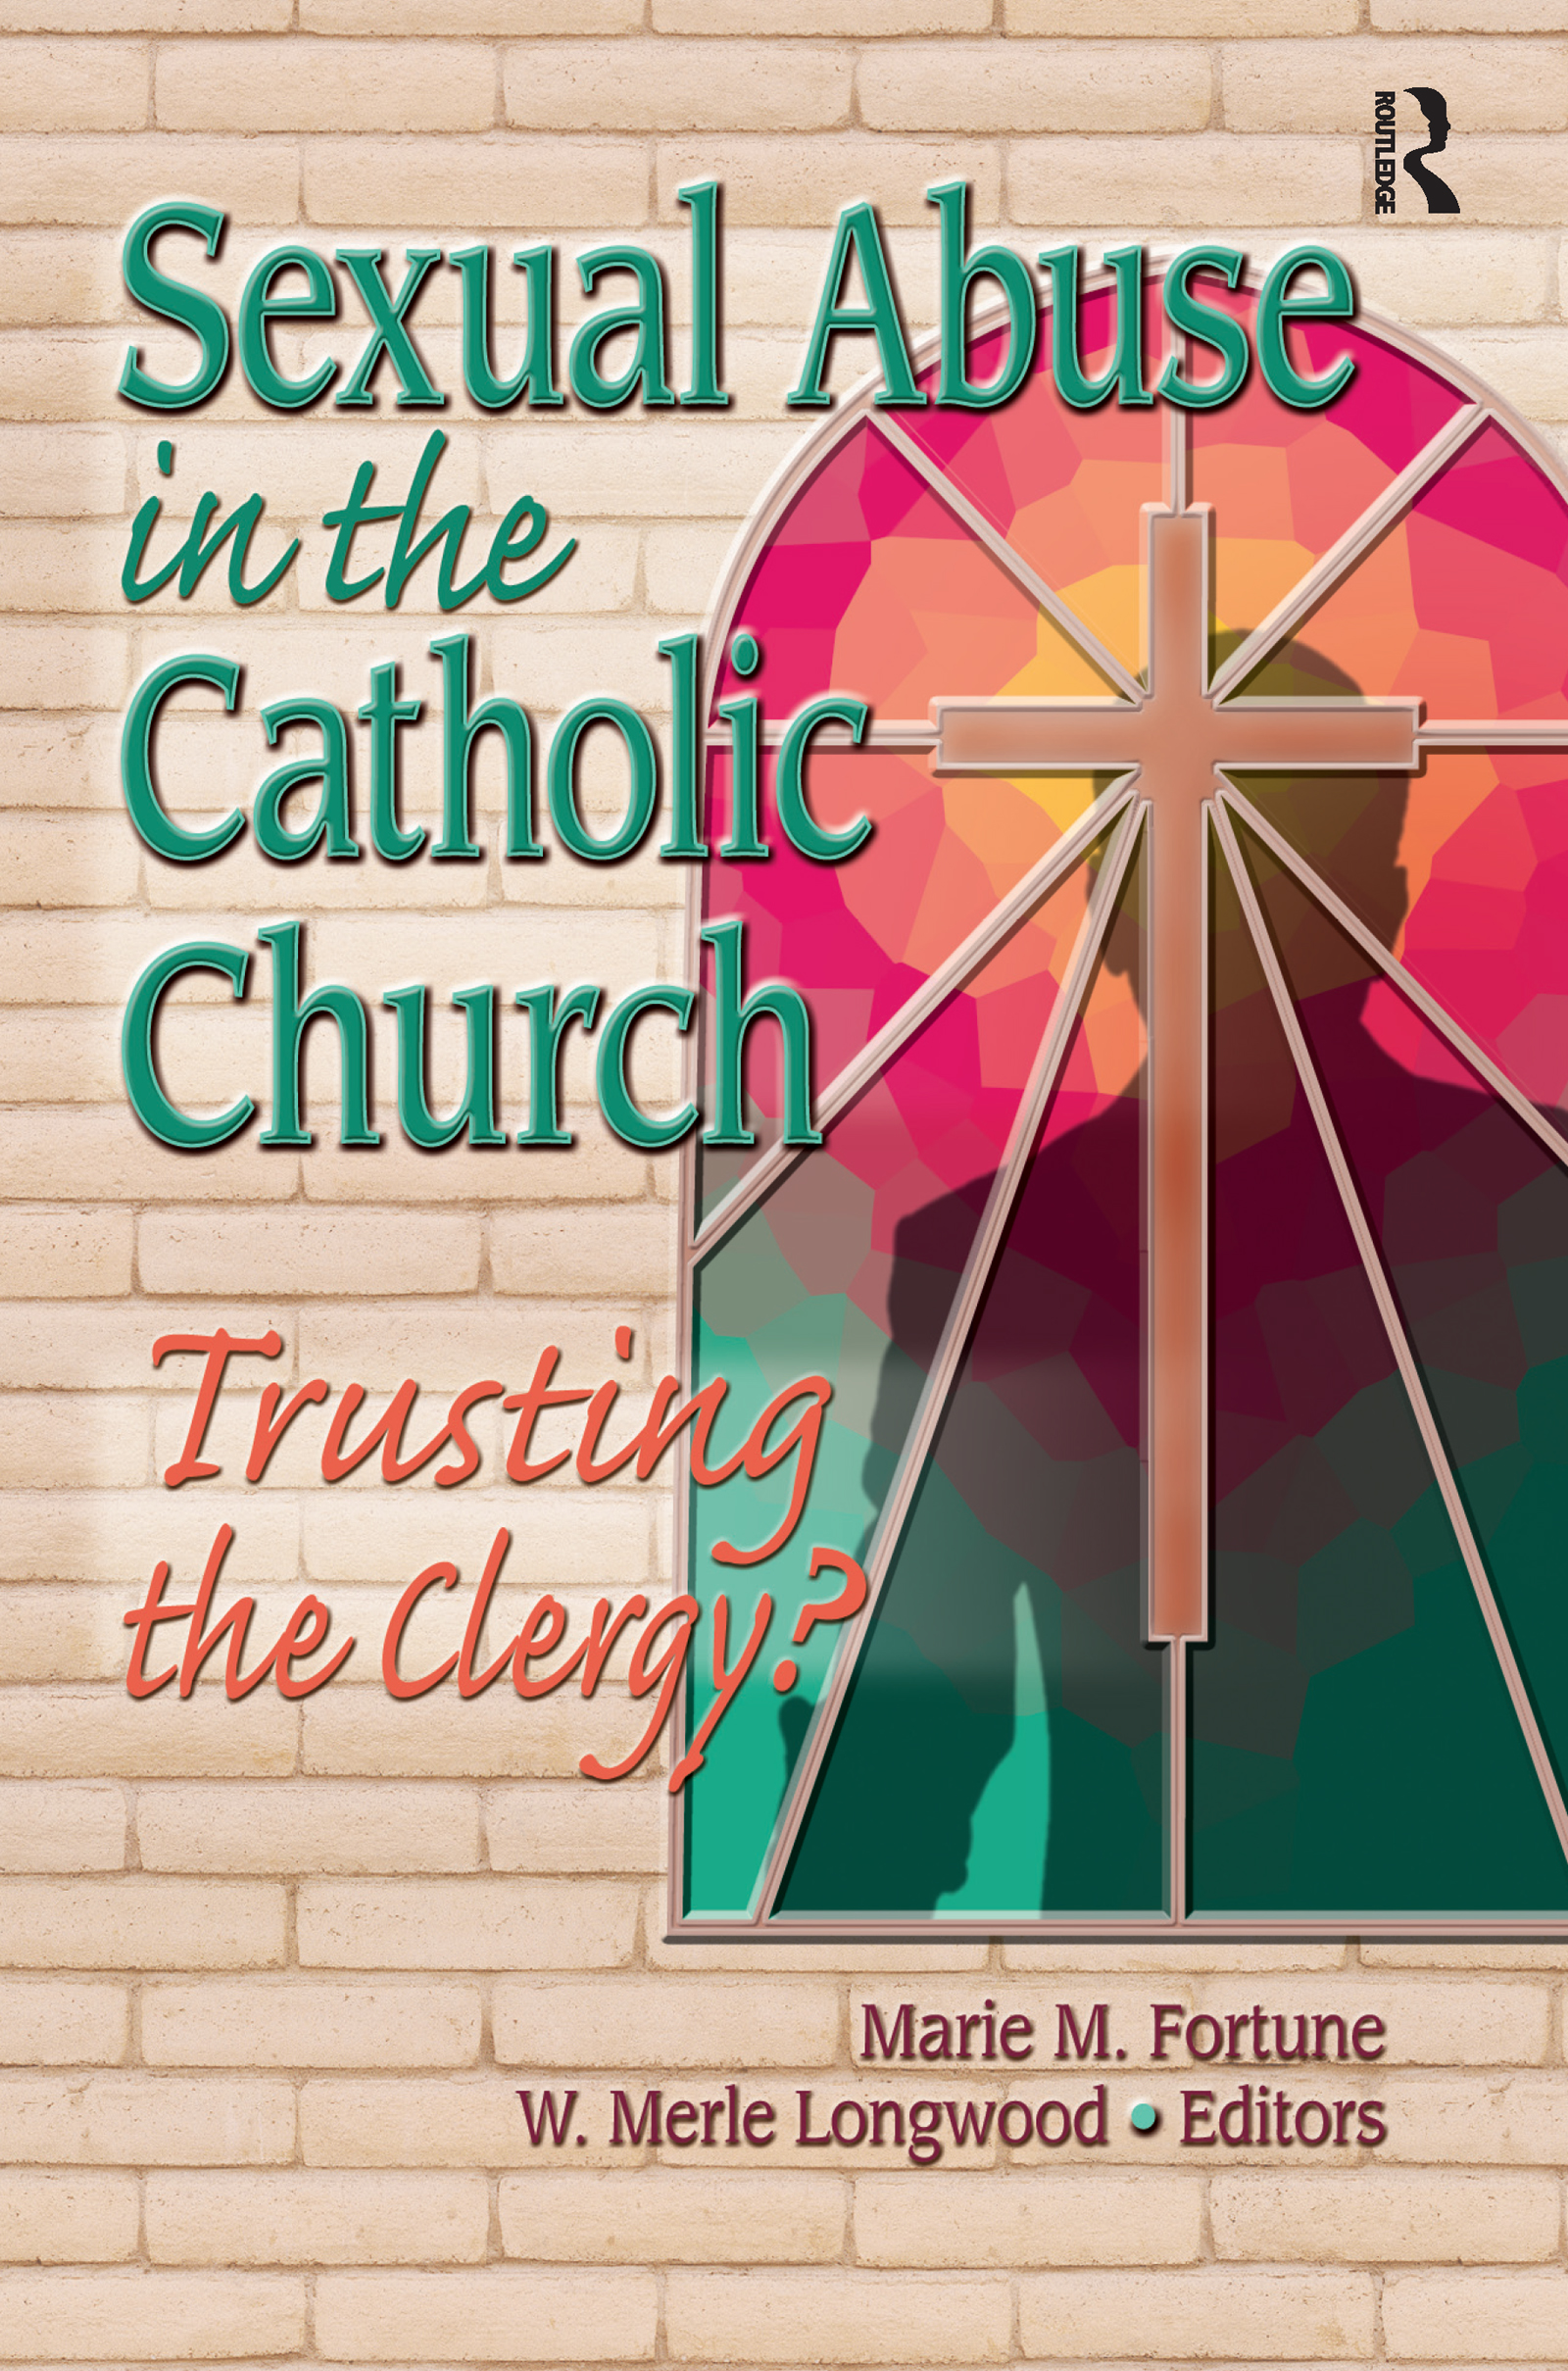 SEXUAL ABUSE IN THE CATH CHURC - Merle Longwood (Siena College, Loudonville, NY, USA)